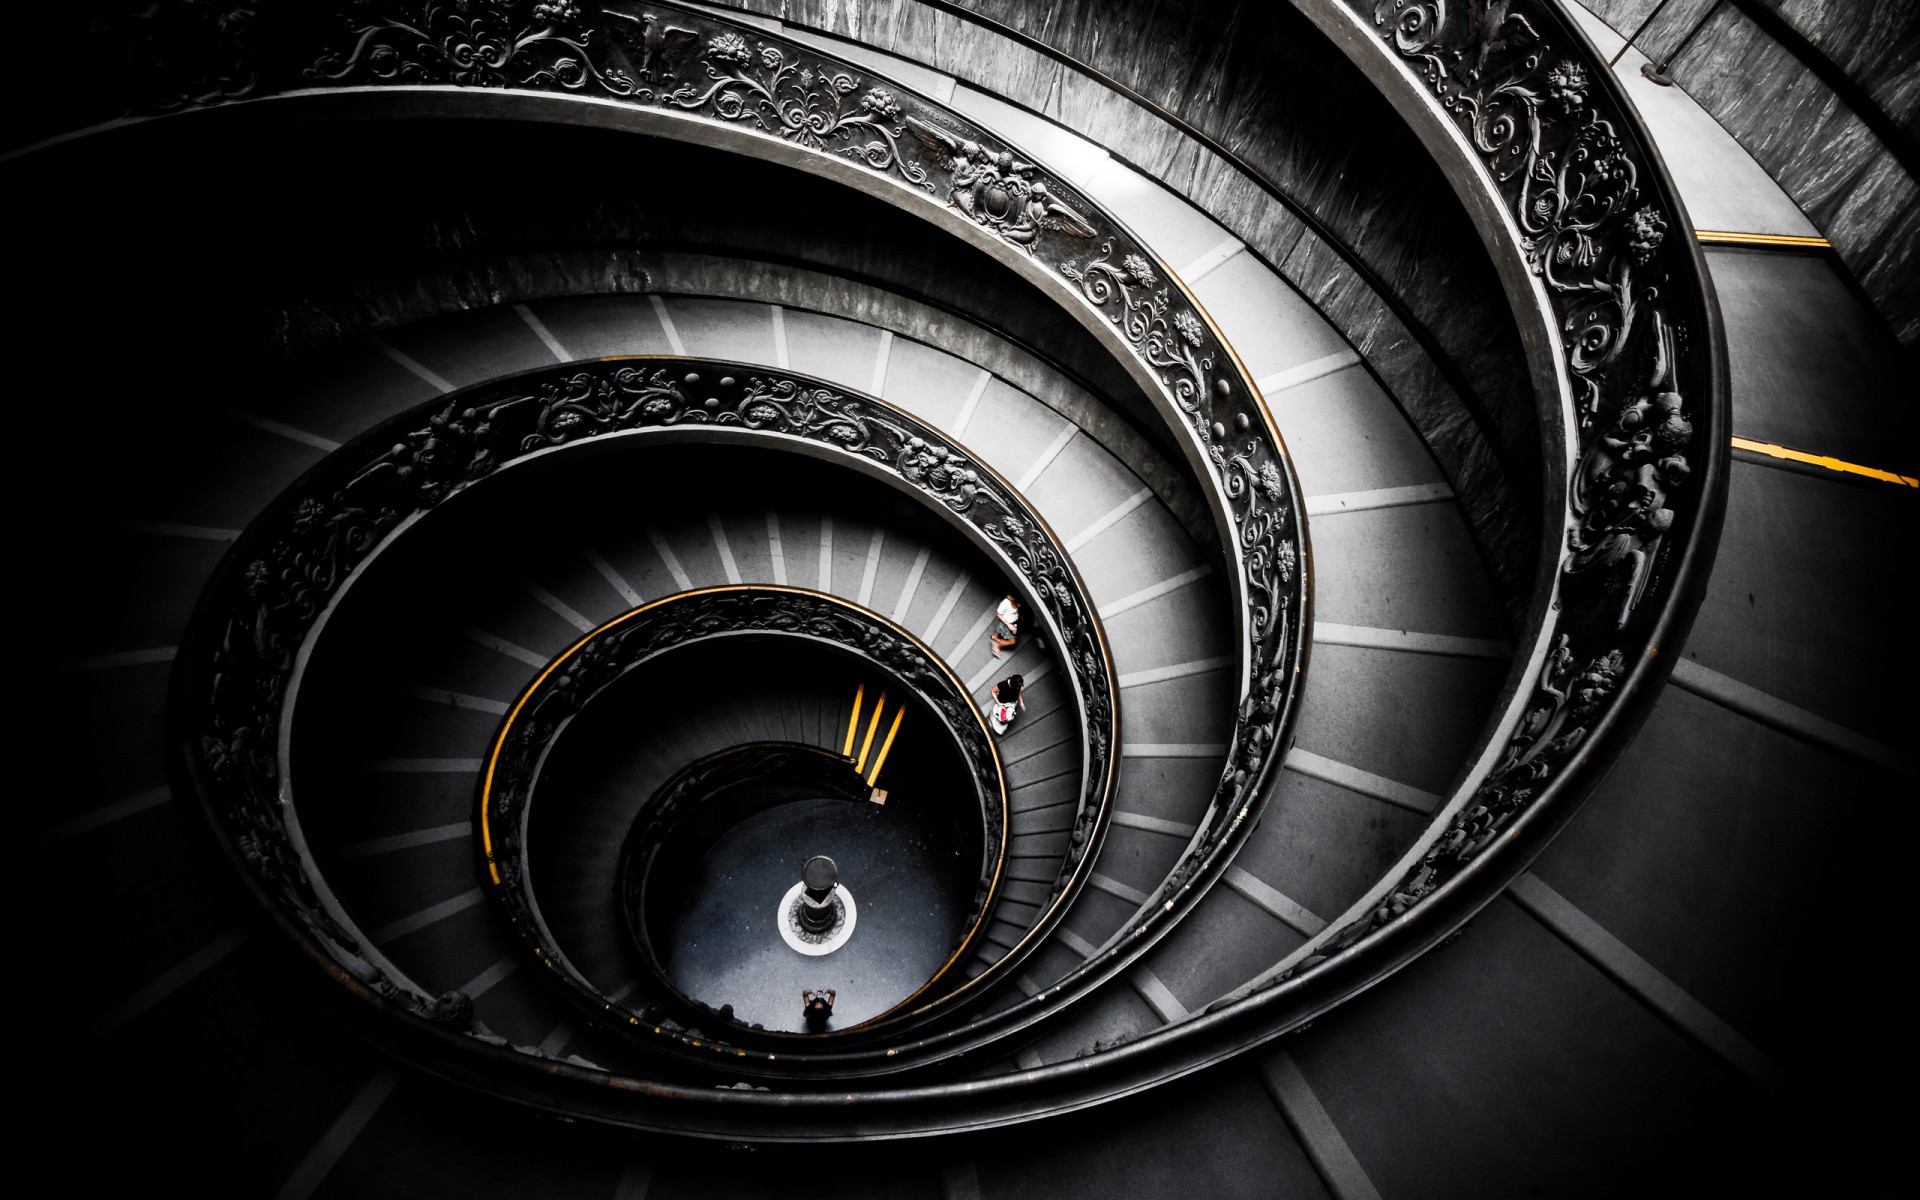 Stairs Handrail Vatican City Museum Tourism Architecture Rome Italy Decorations Spiral Selective Col 1920x1200